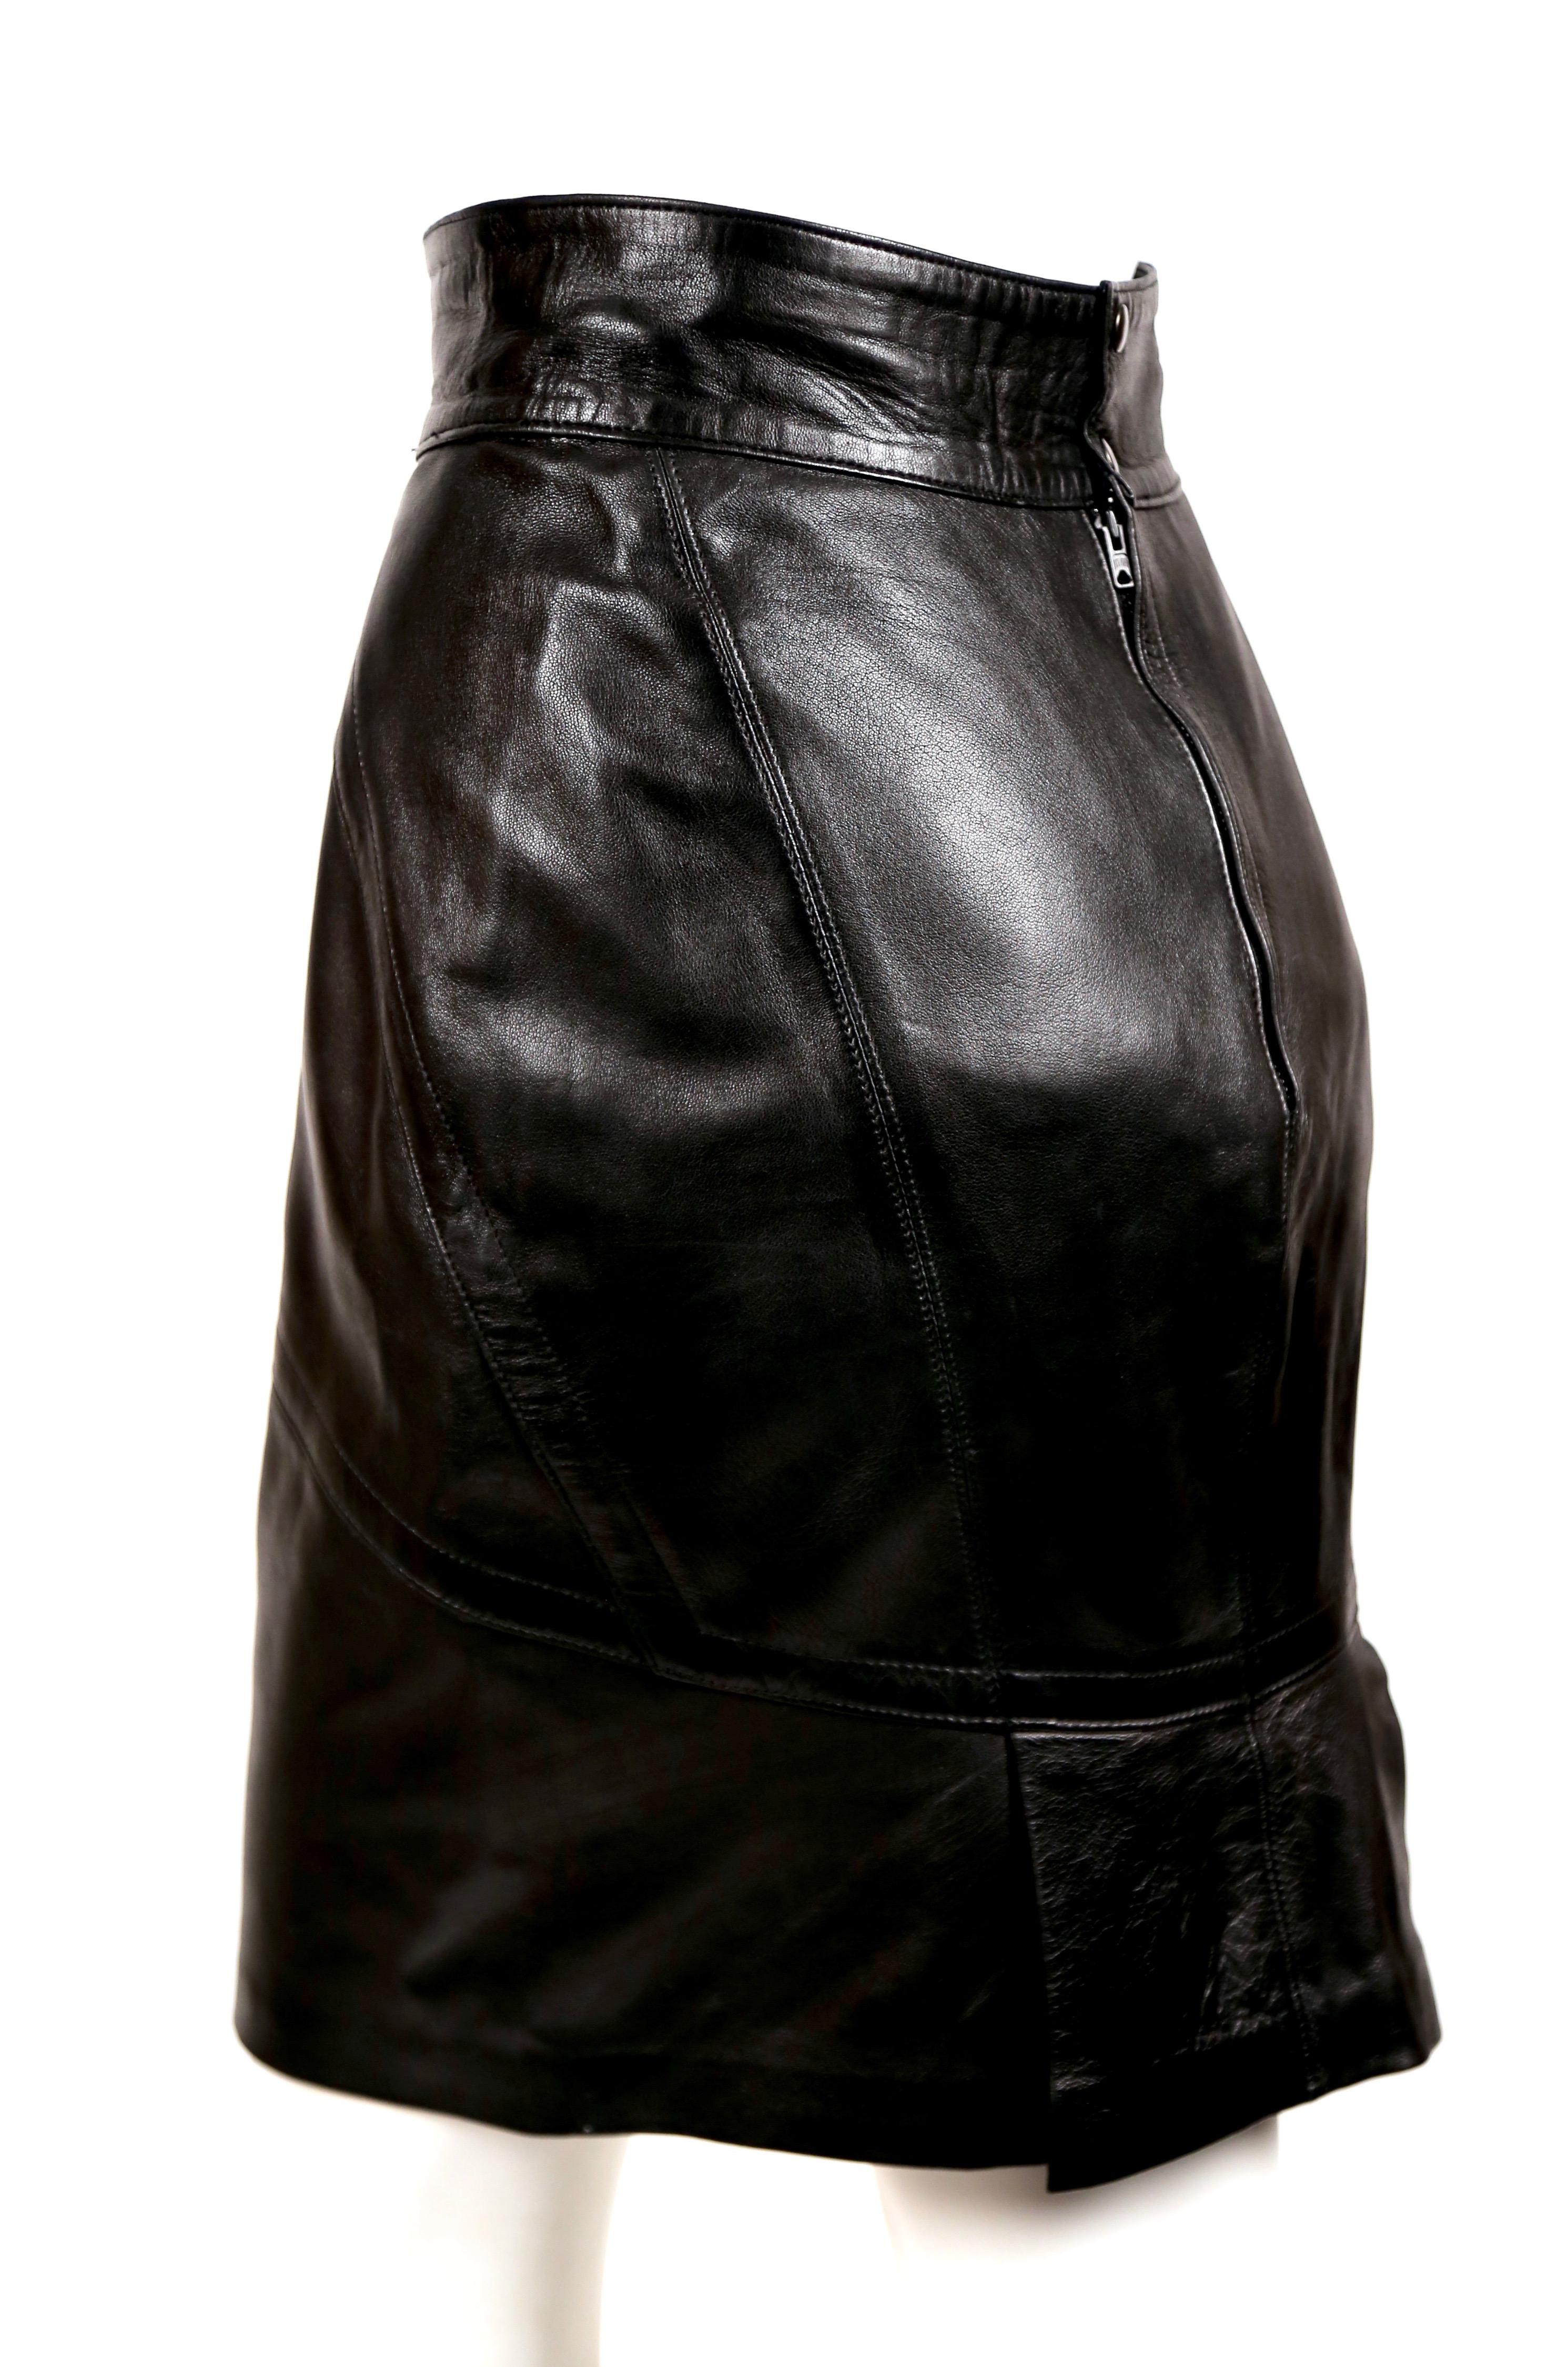 Jet black butter soft leather skirt with seaming and pleated hemline from Azzedine Alaia dating to the 1980's. French size 40 although this skirt is very small and best fits a US 4. Approximate measurements: waist 26